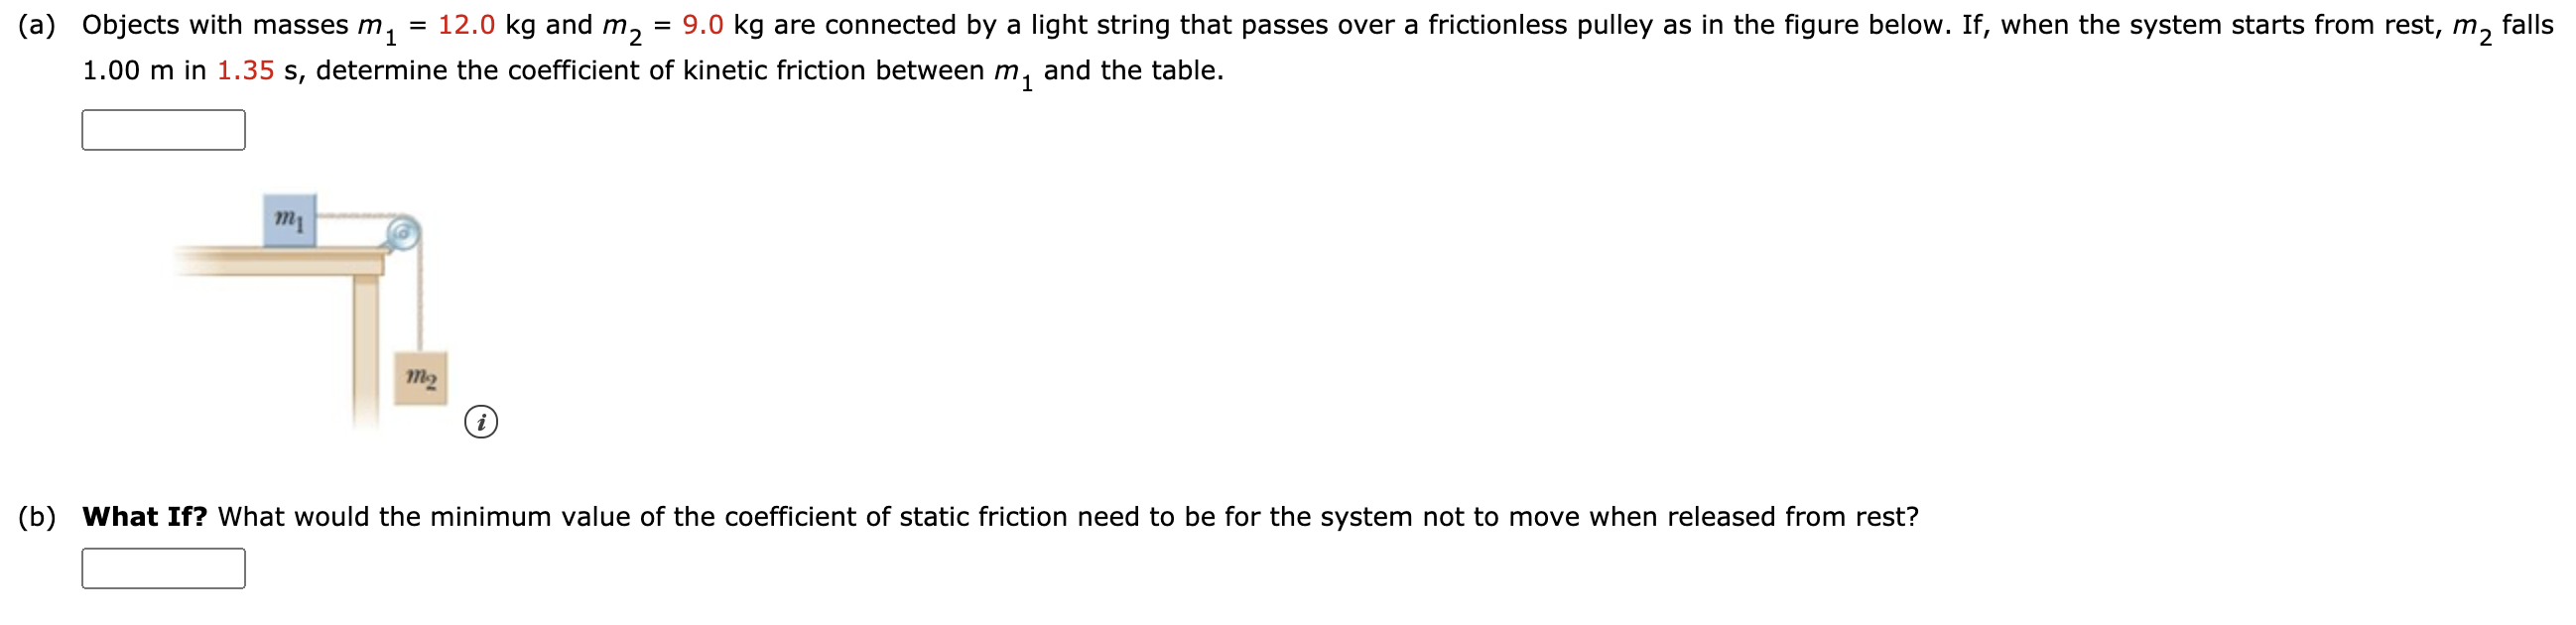 (a) Objects with masses m,
= 12.0 kg and m2
9.0 kg are connected by a light string that passes over a frictionless pulley as in the figure below. If, when the system starts from rest, m, falls
1.00 m in 1.35 s, determine the coefficient of kinetic friction between m, and the table.
m2
(b) What If? What would the minimum value of the coefficient of static friction need to be for the system not to move when released from rest?
